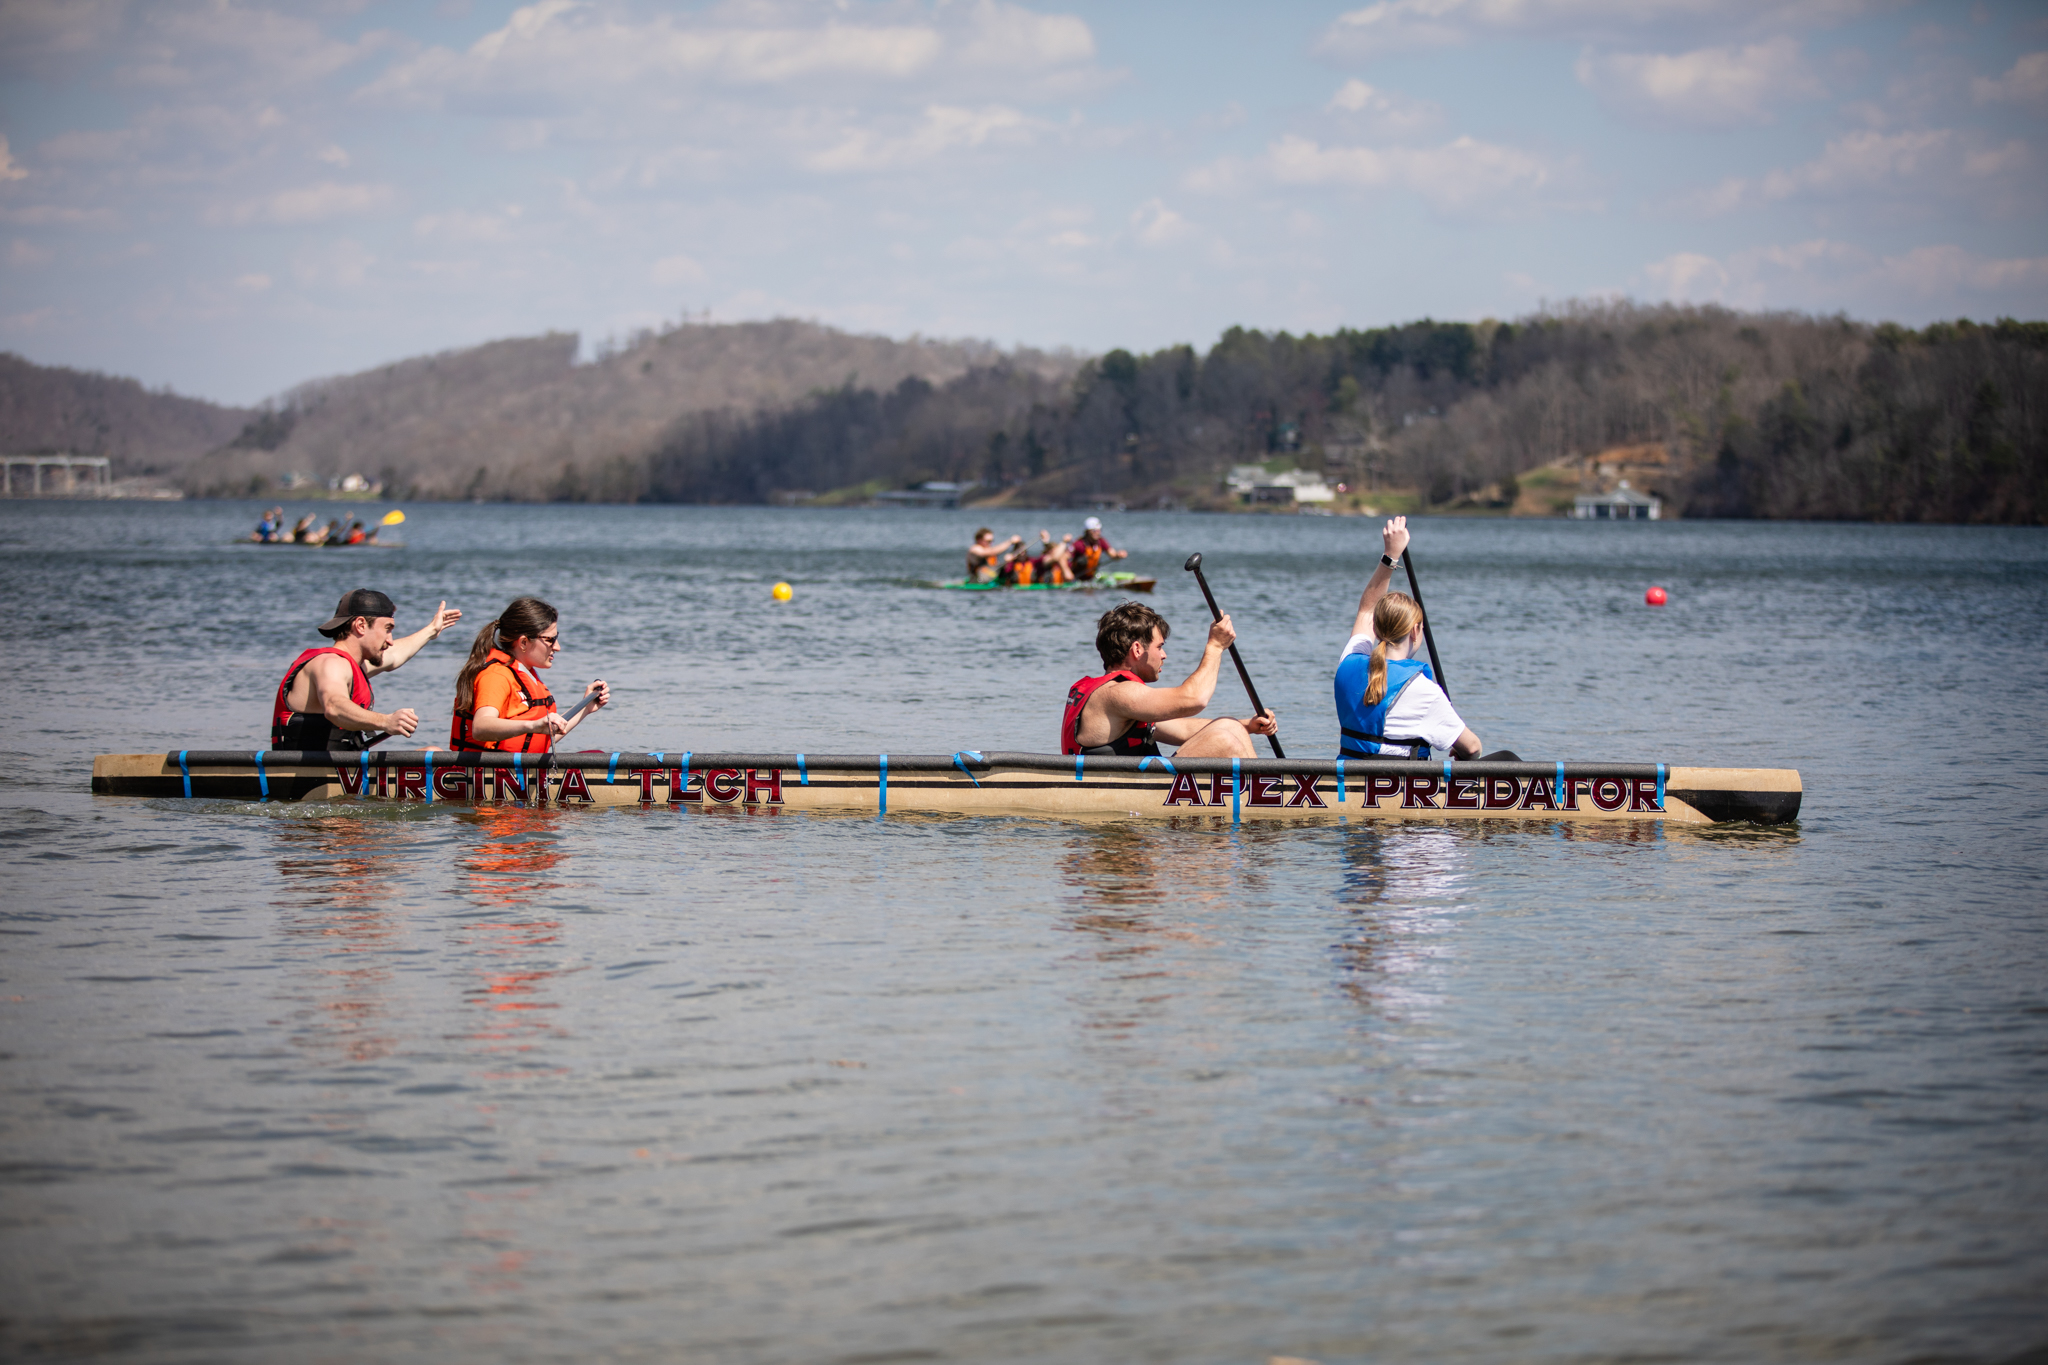 Concrete canoe team members paddle on the water during competition.